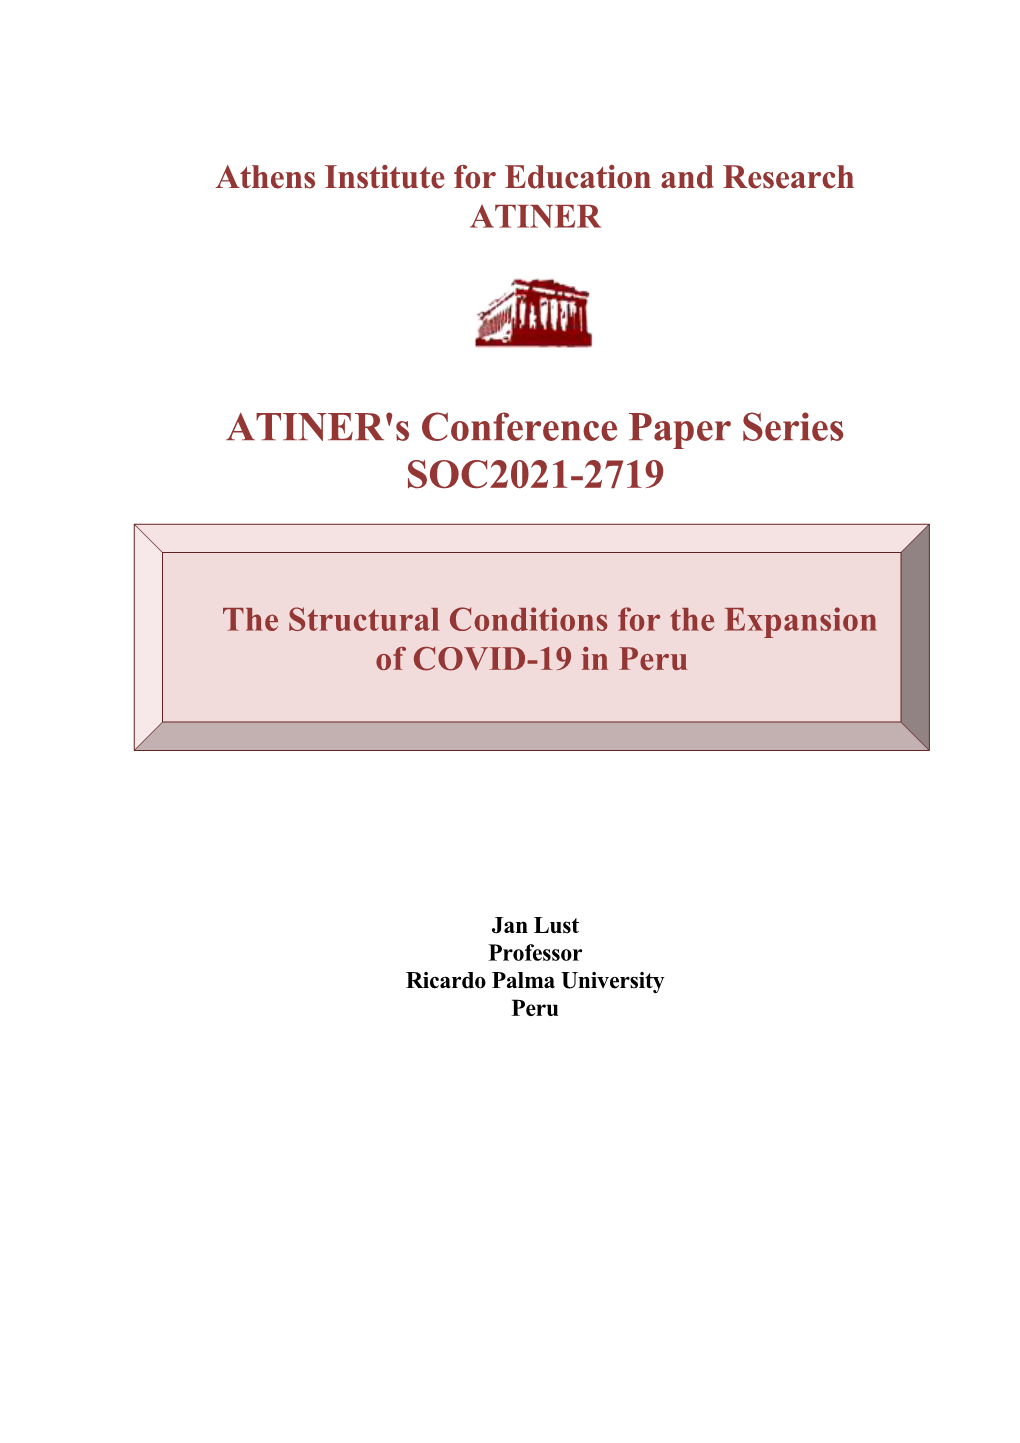 ATINER's Conference Paper Series SOC2021-2719